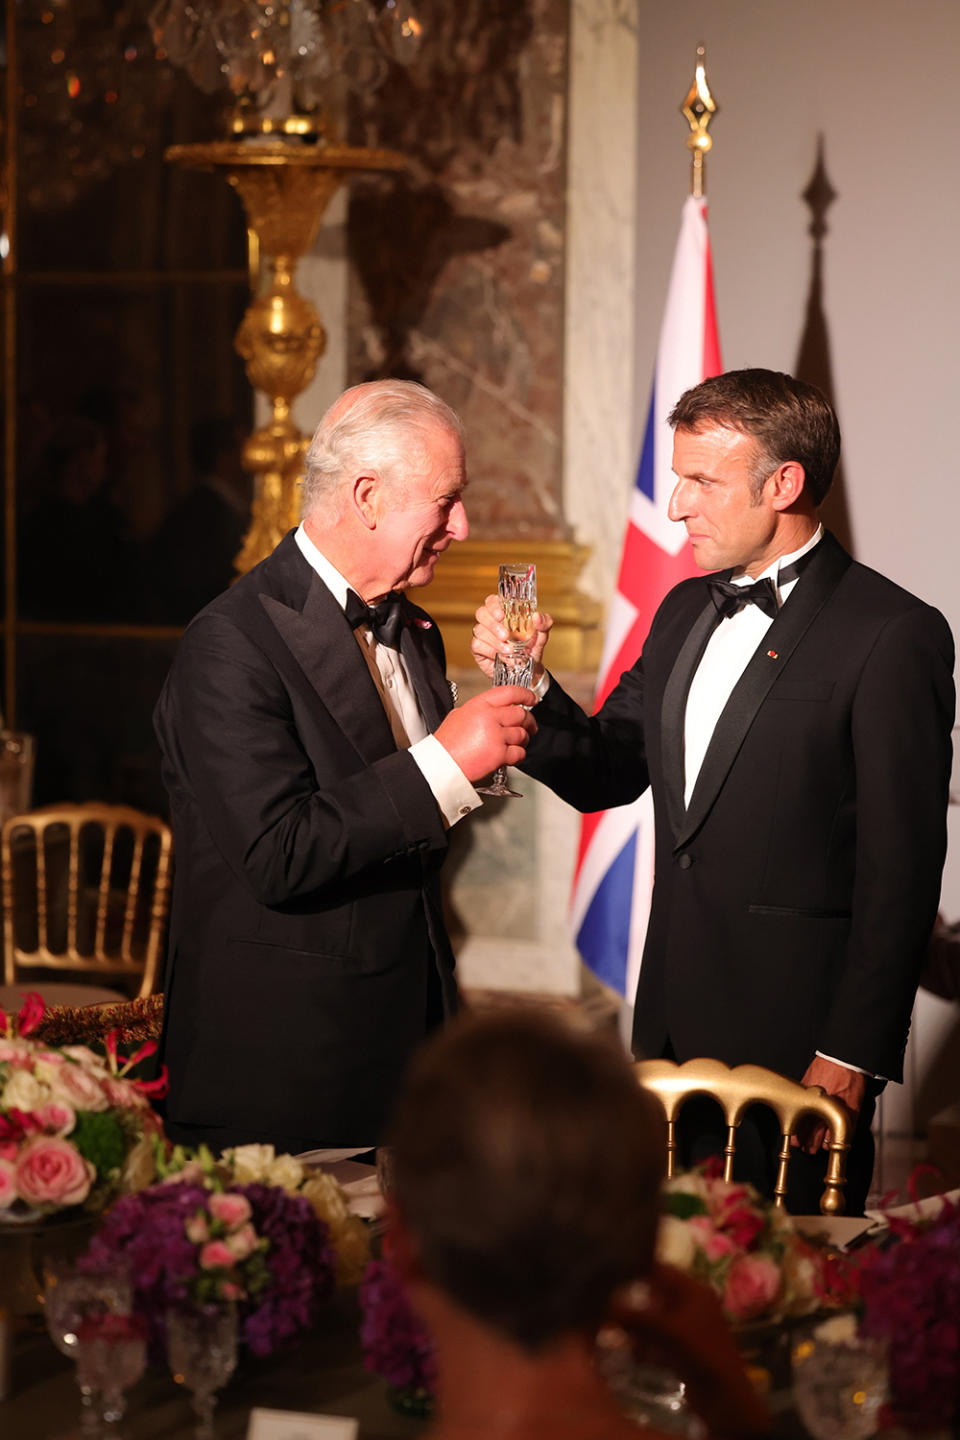 King Charles III and President of France, Emmanuel Macron toast during the state banquet on September 20